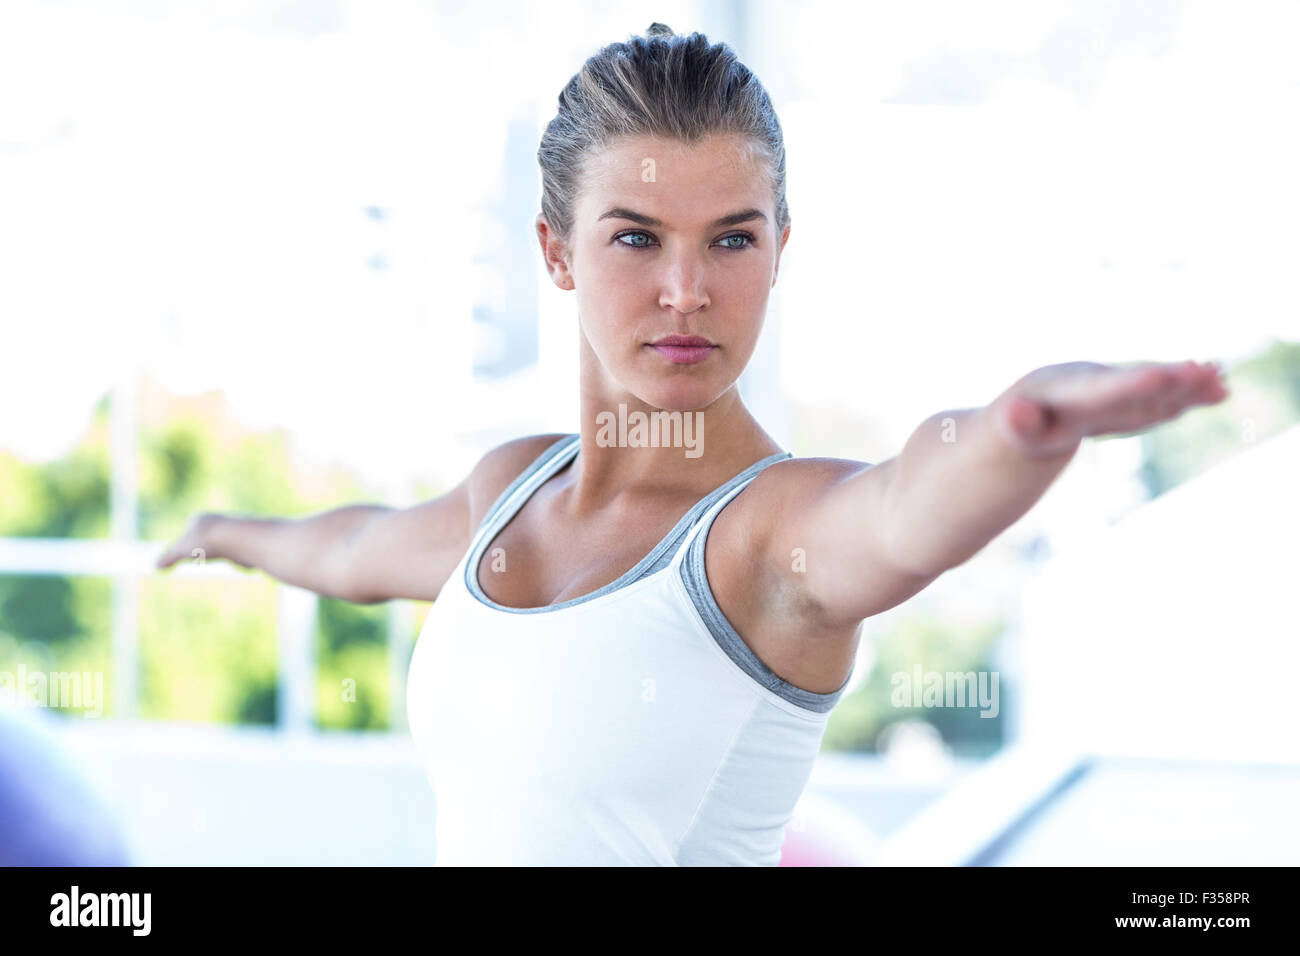 Focused woman with arms outstretched Stock Photo